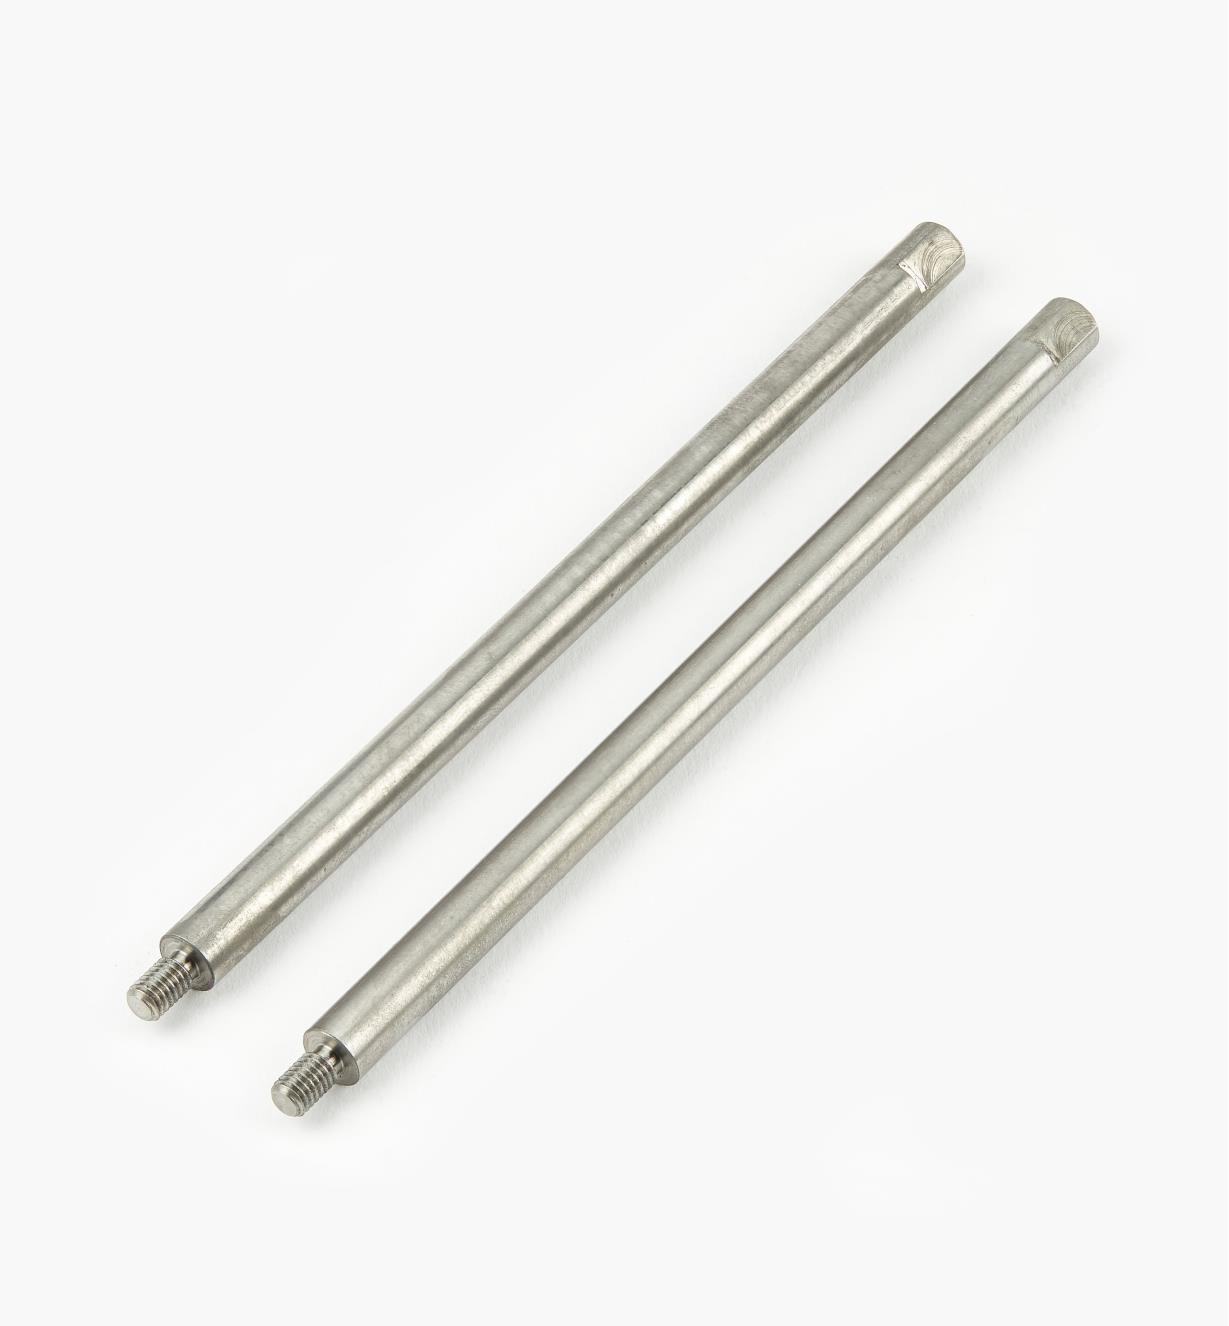 05P4560 - 6" Fence Rods, pair